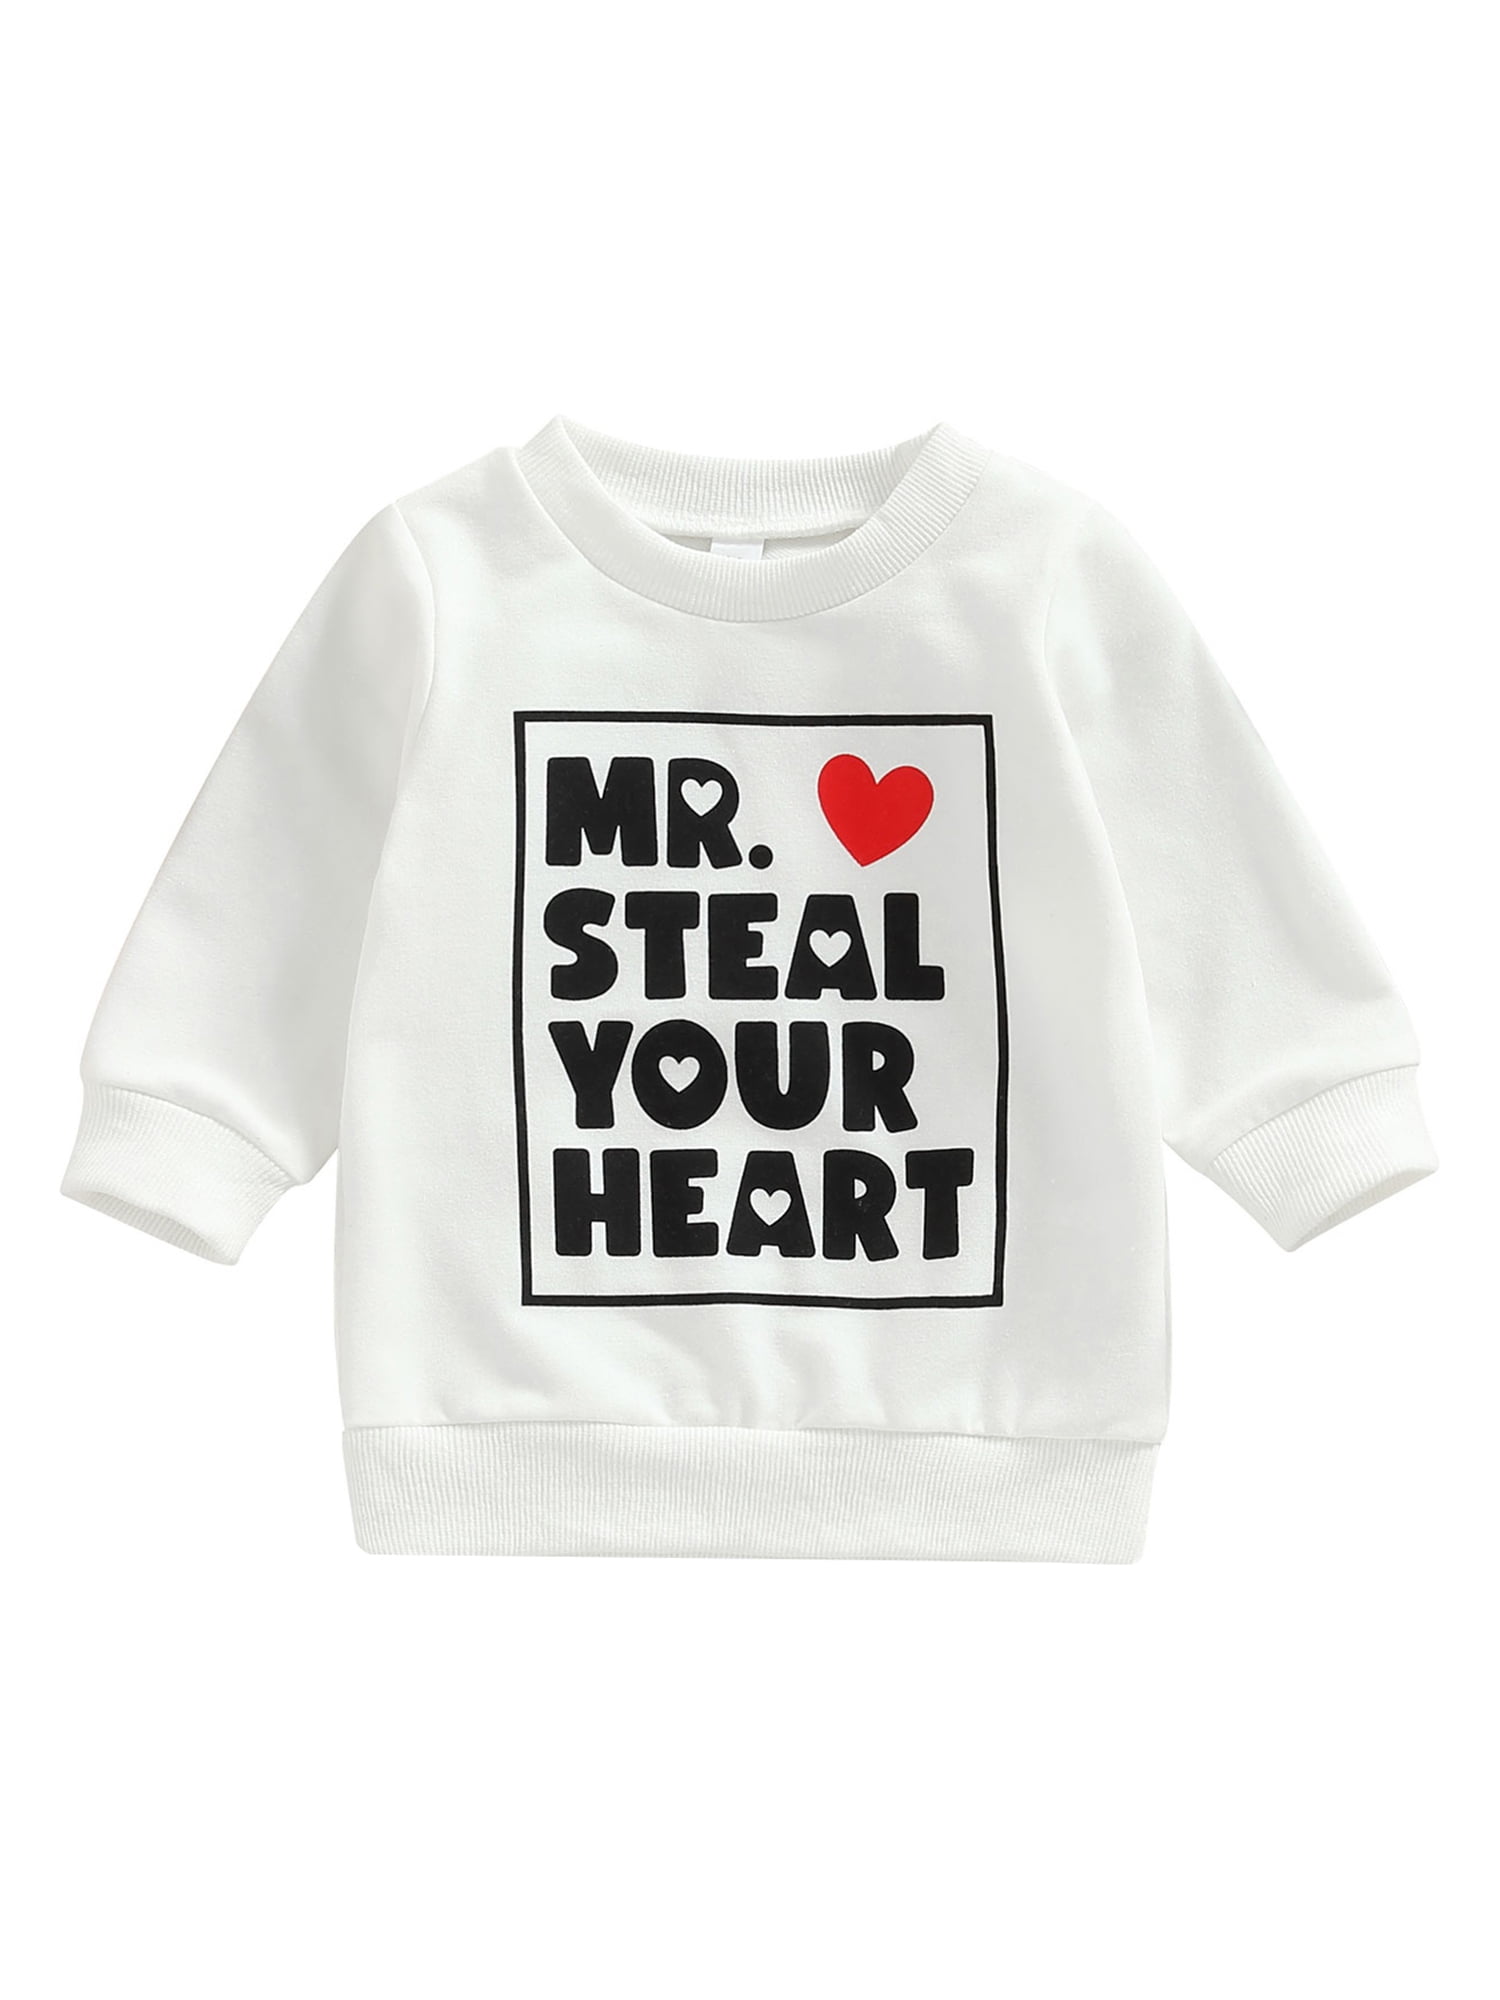 Valentine\'s Steal Boys Toddler Pullover Girls MR. Spring Sweatshirt Clothes Aunavey Baby Day Your Top Heart